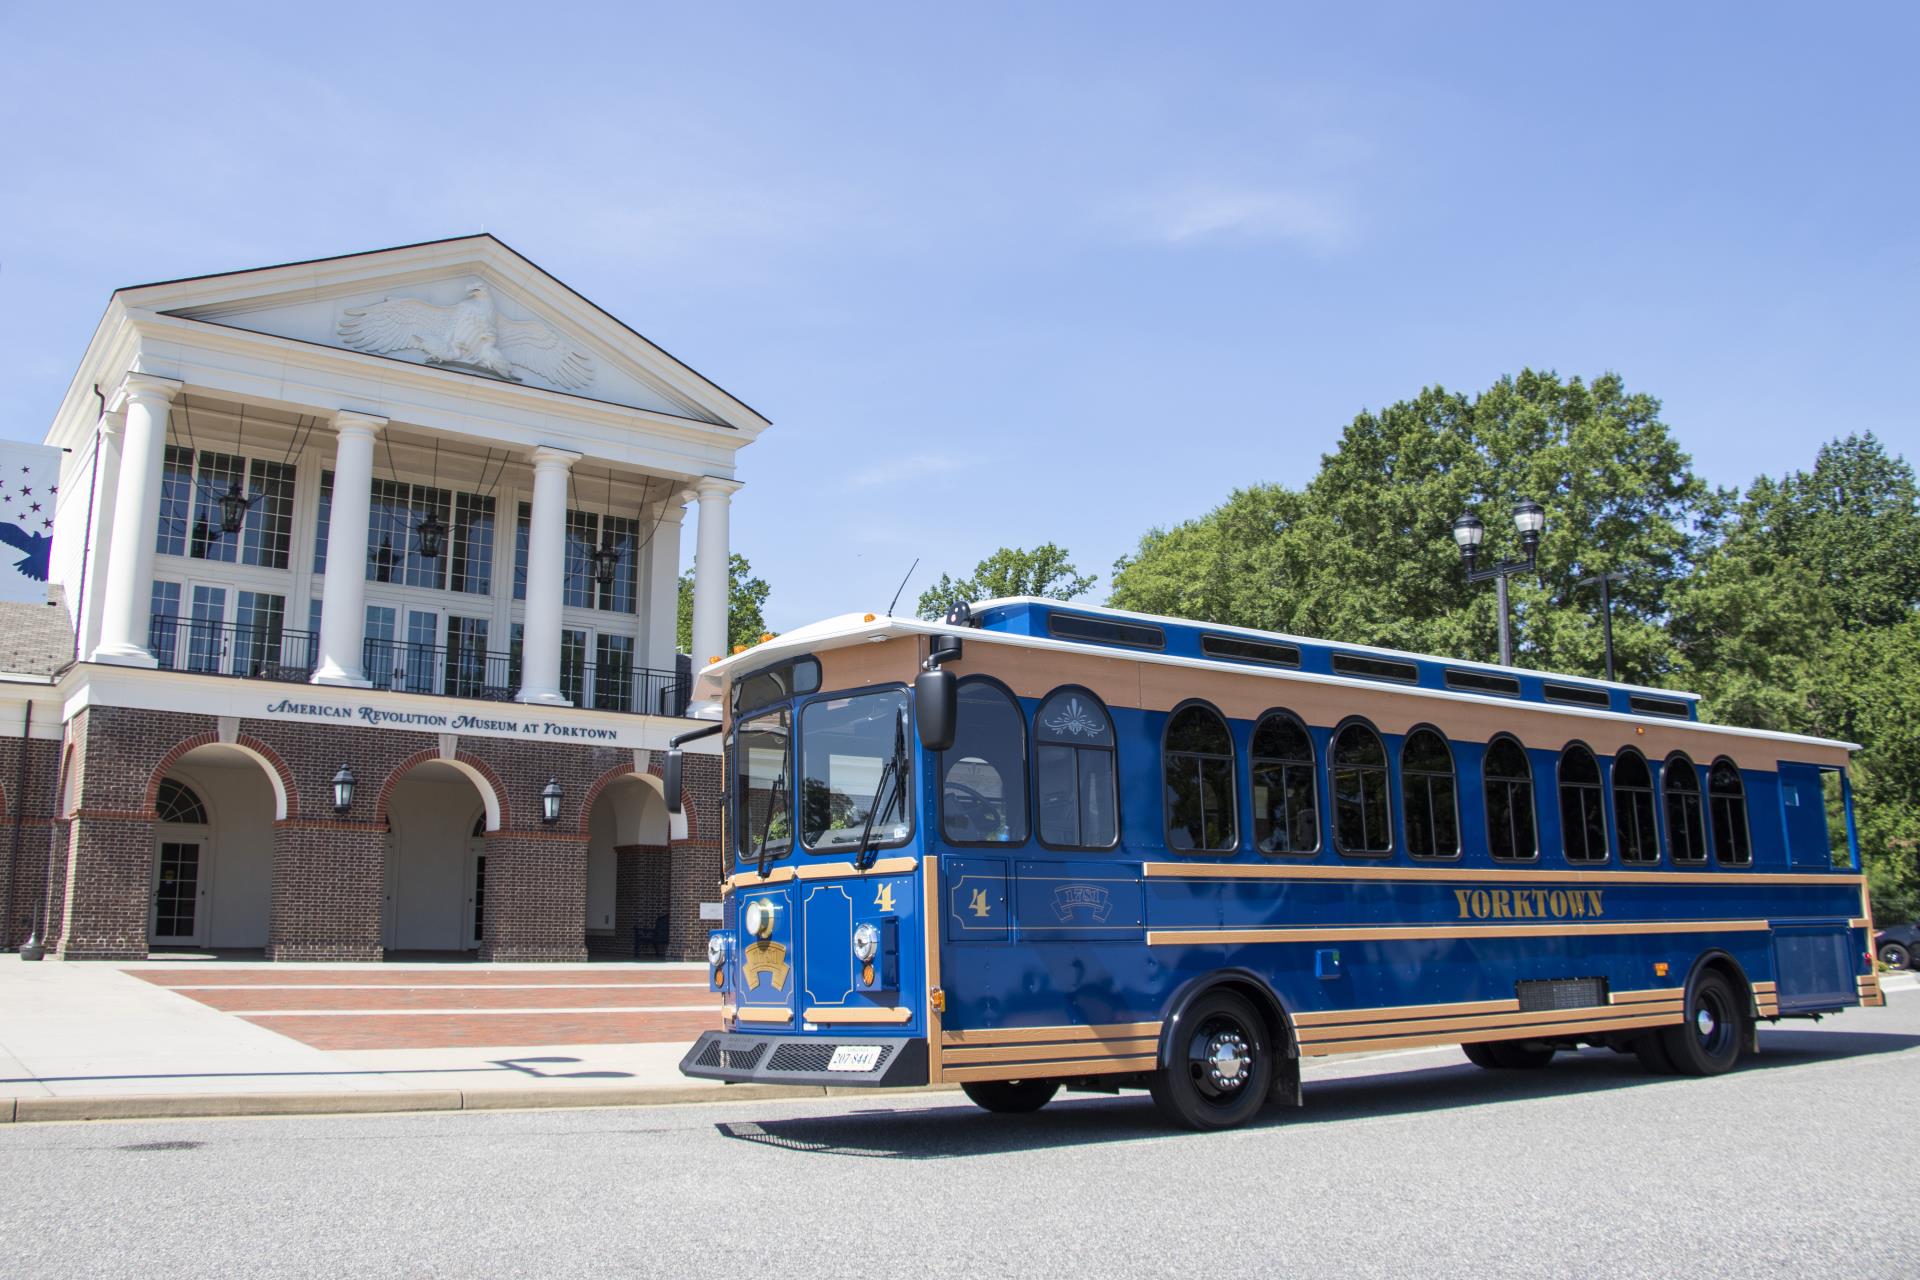 Yorktown Trolley at the American Revolution Museum at Yorktown. York County Tourism & Events photo.